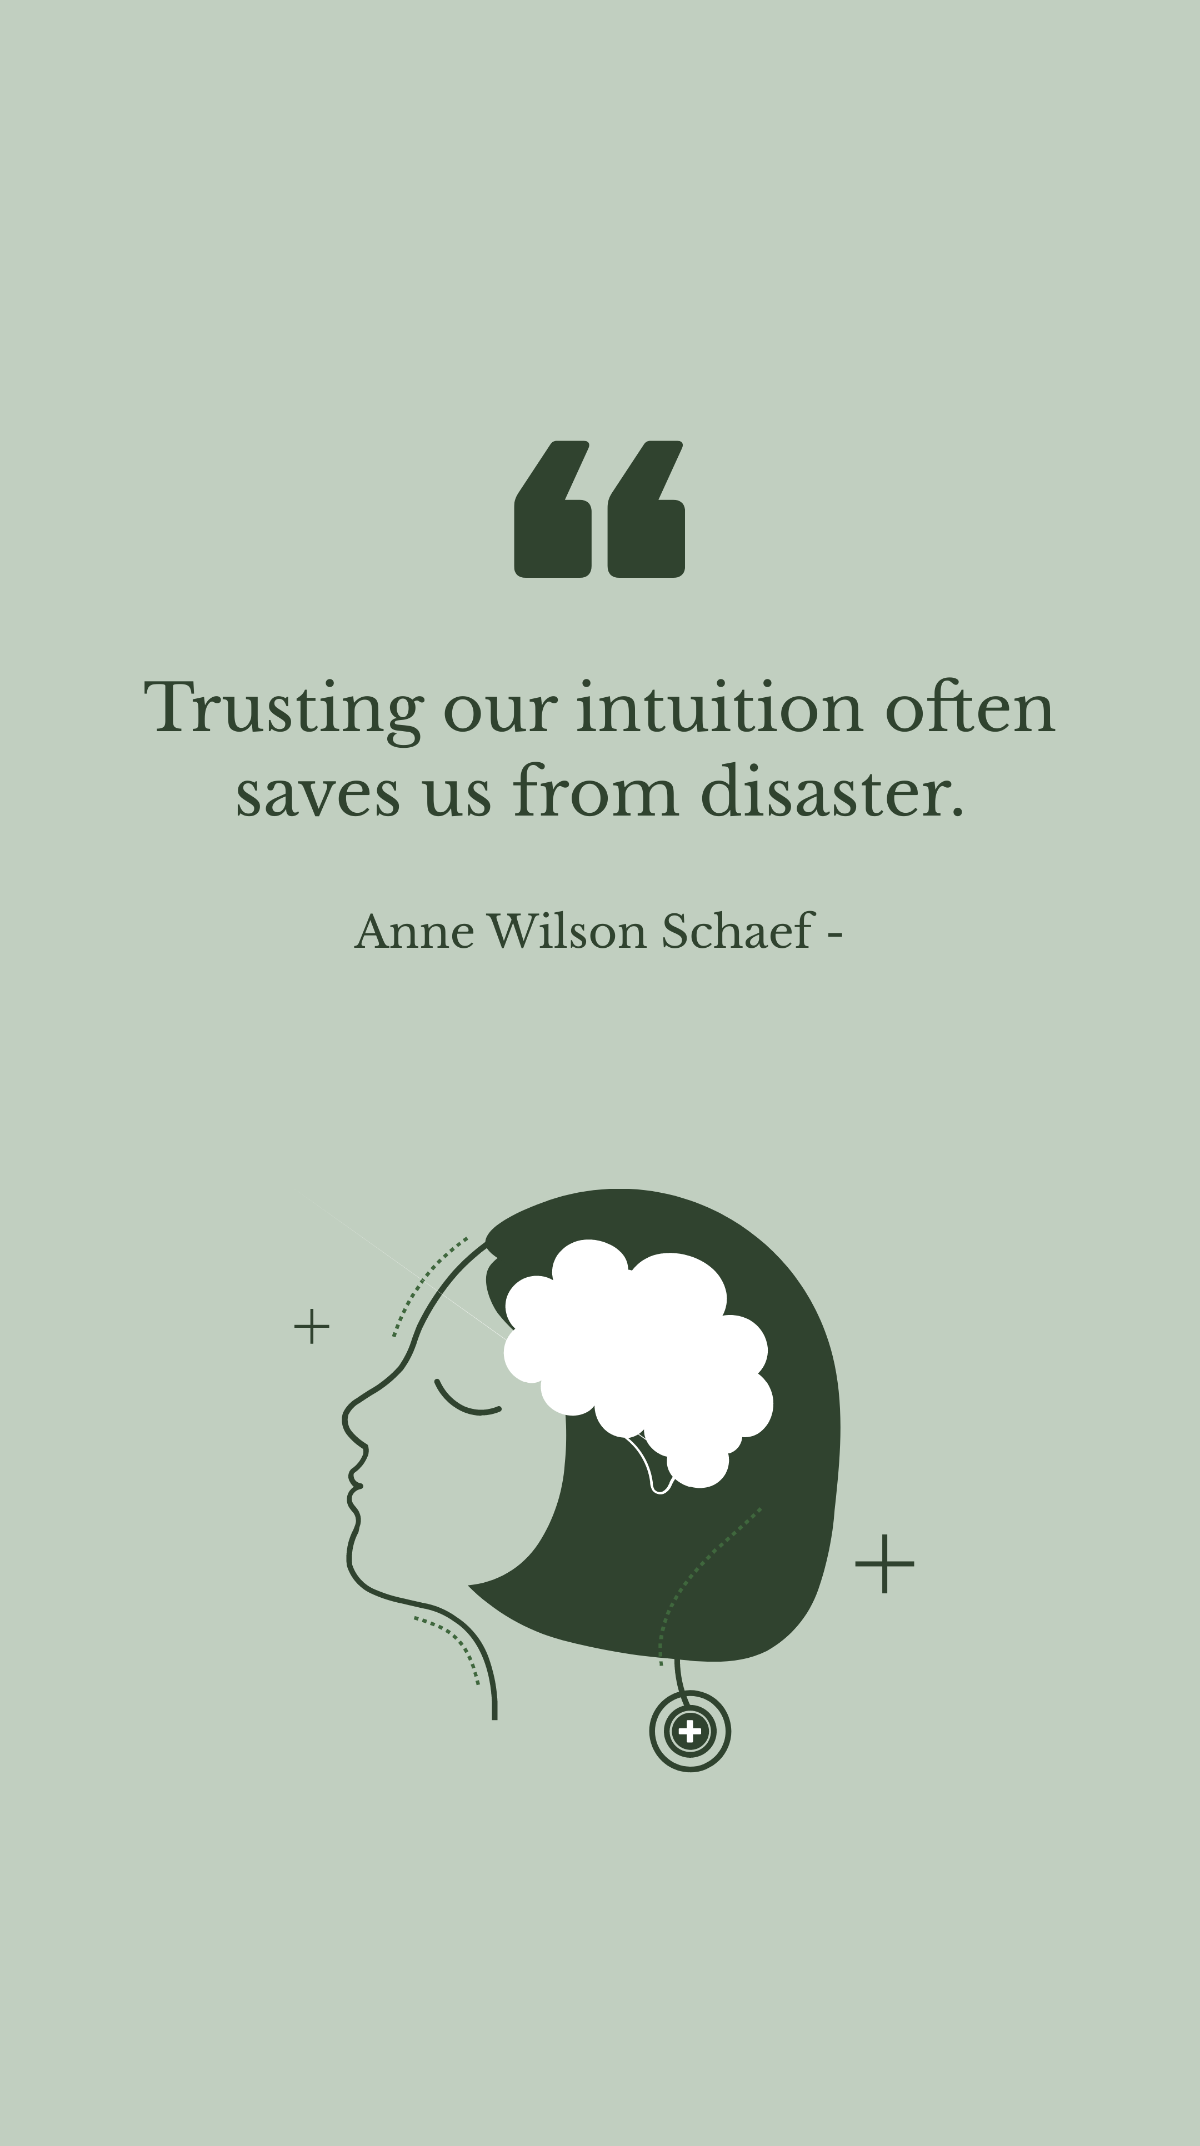 Anne Wilson Schaef - Trusting our intuition often saves us from disaster. Template